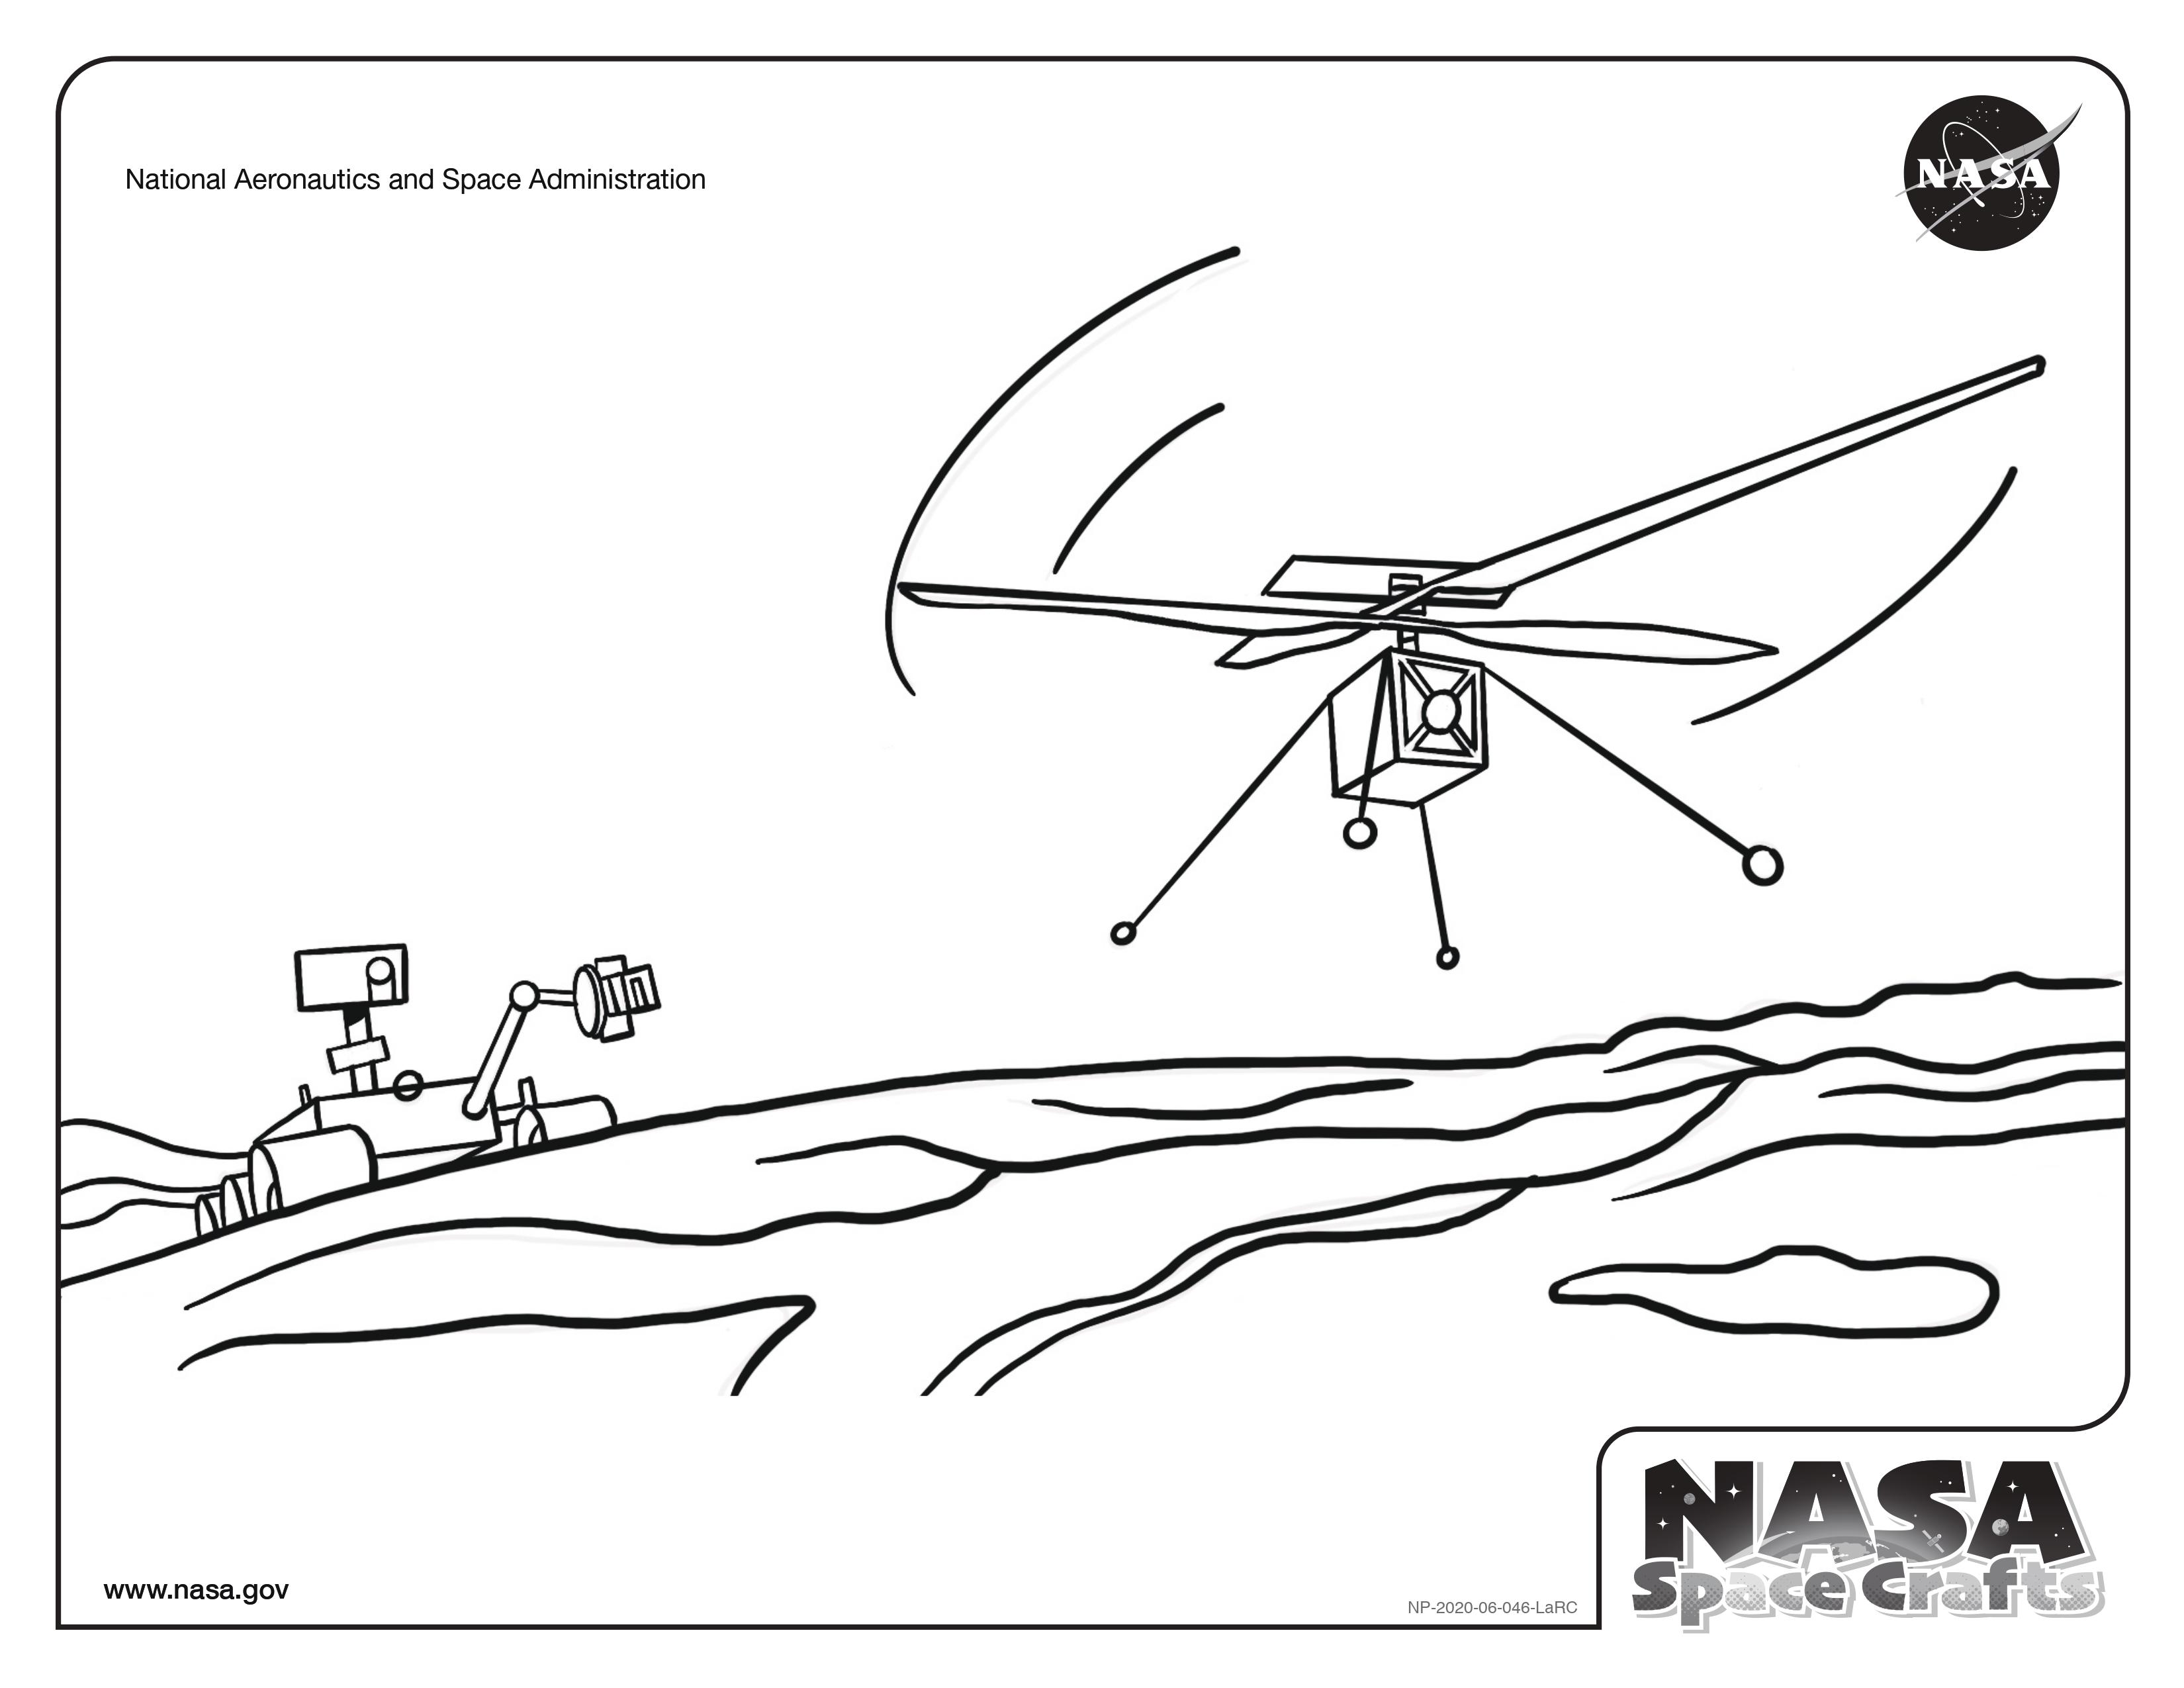 An image of the NASA Space Crafts coloring page about the Mars 2020/Perseverance rover mission